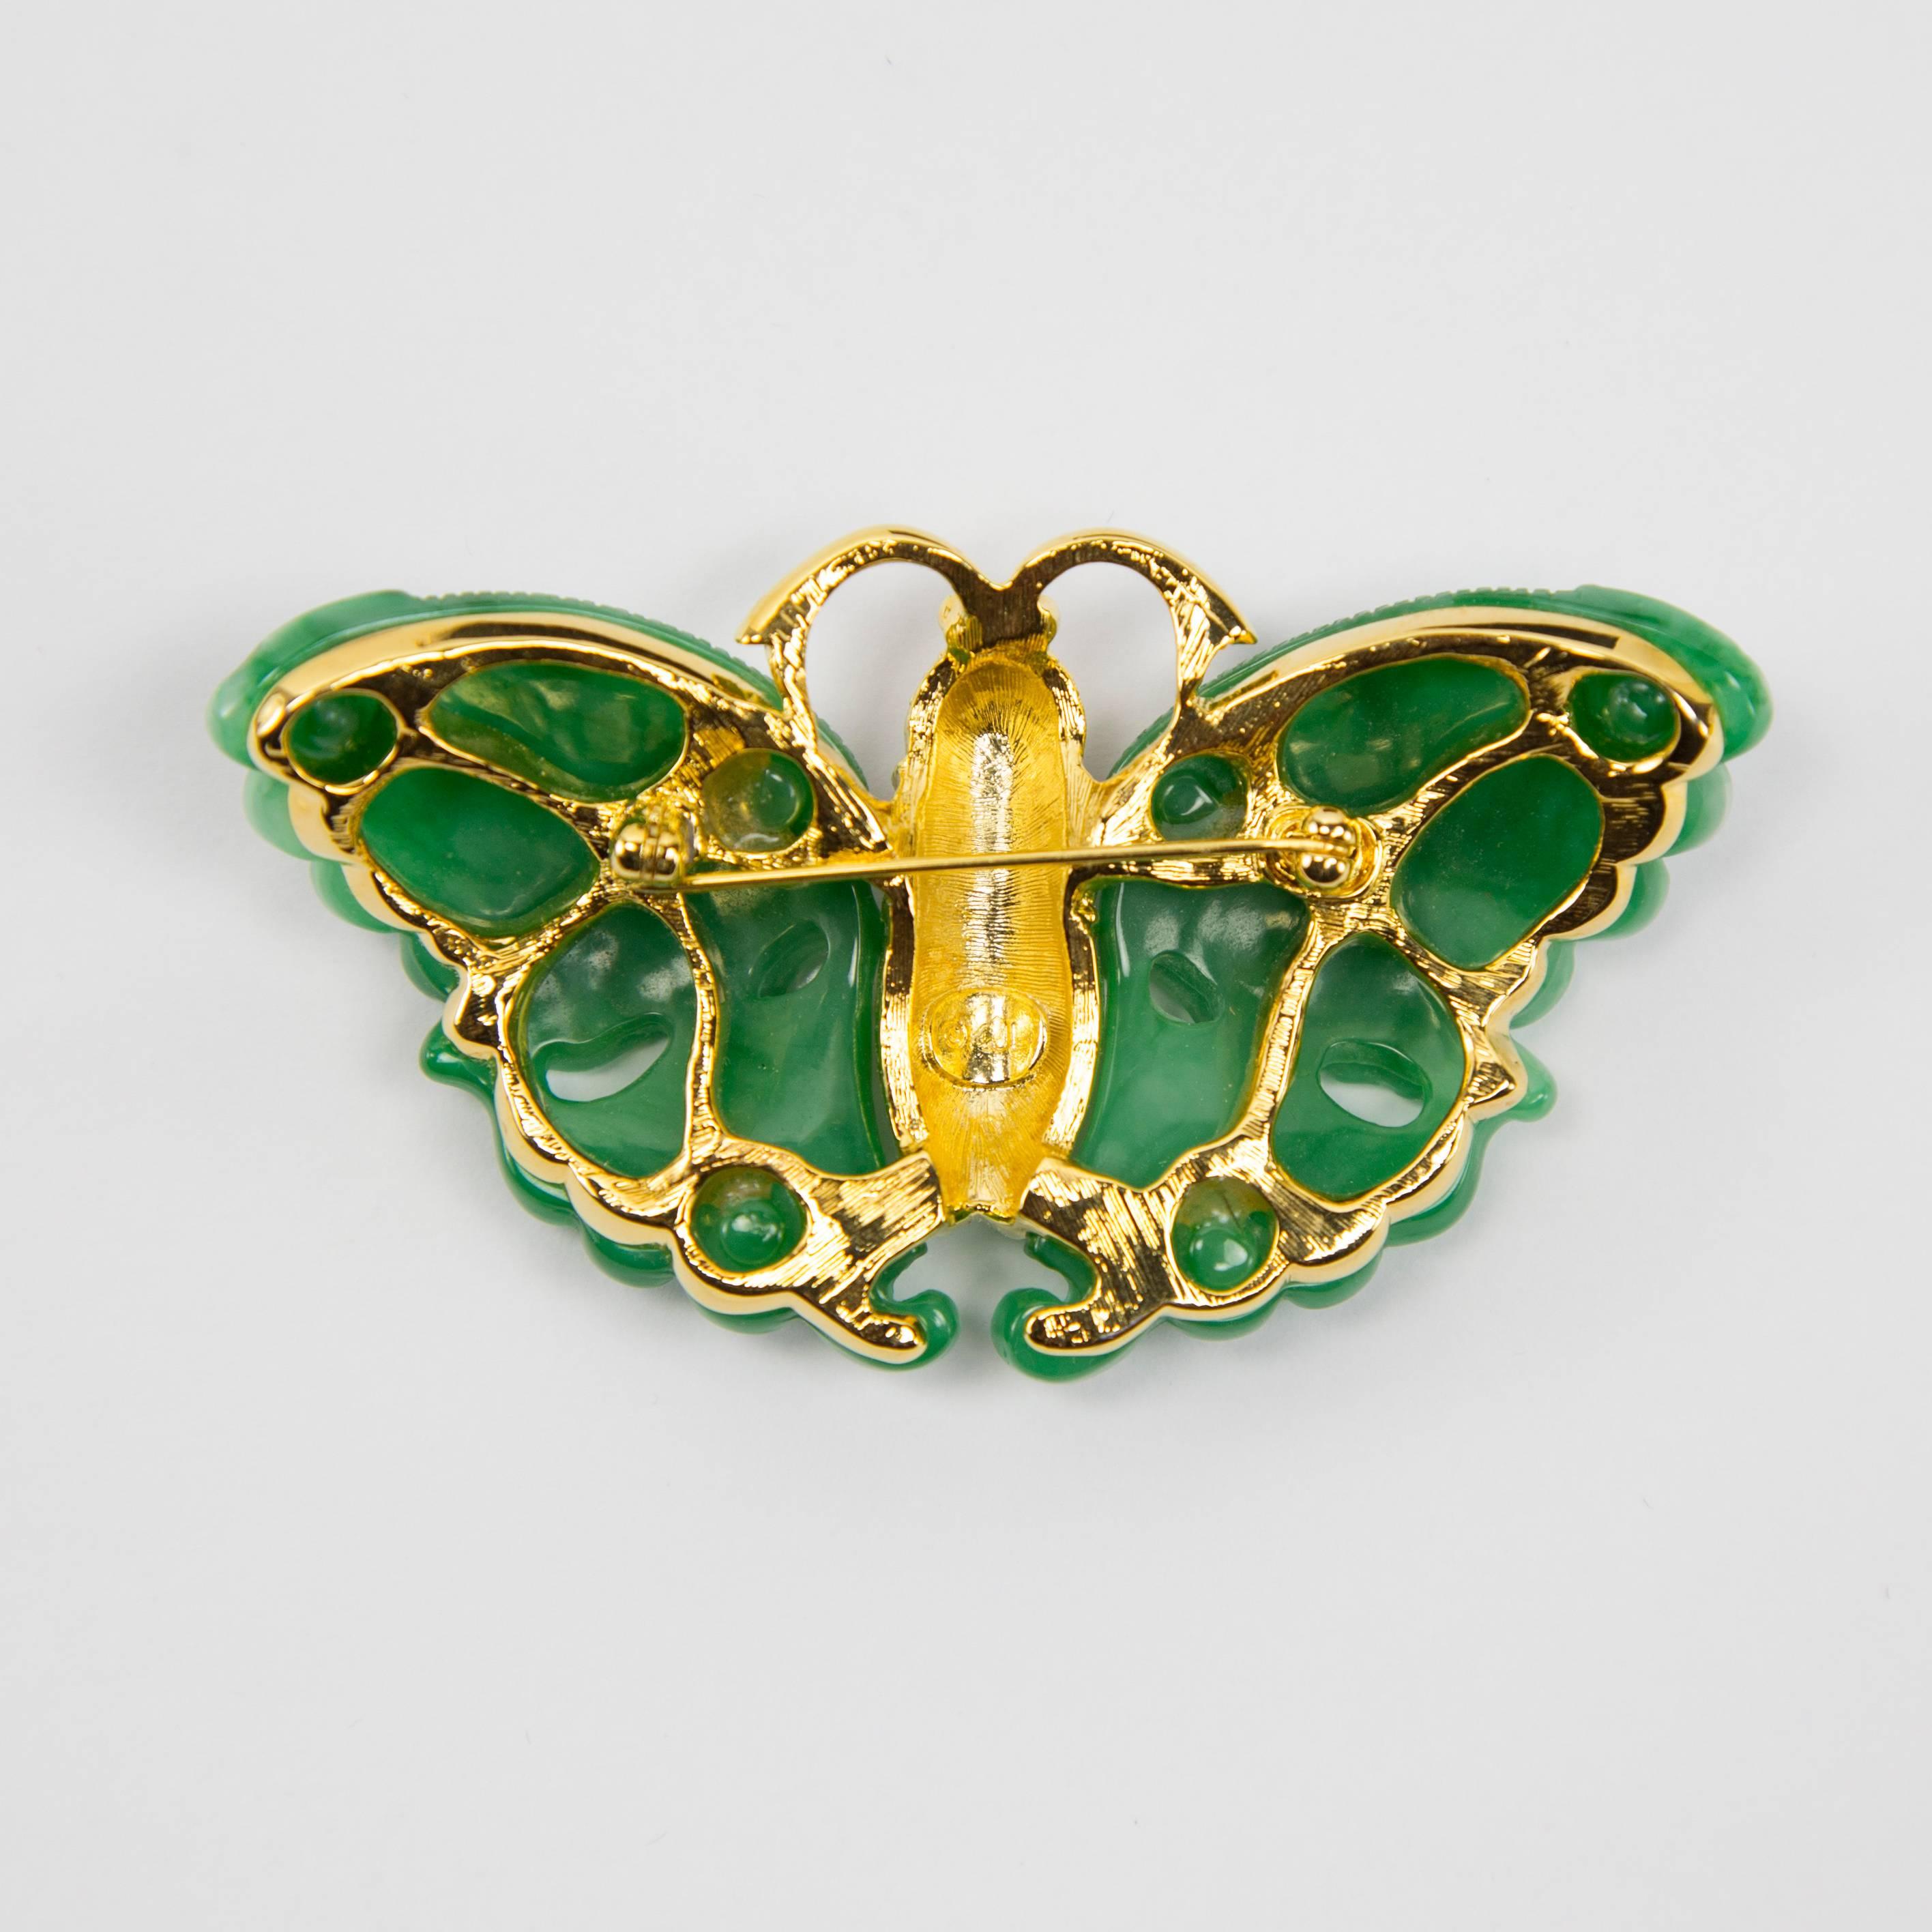 Beautiful signed Kenneth Jay Lane Large Butterfly Brooch featuring ornate Faux green Jade wings, Coral enameled body Pave set with Faux Diamonds; marked on reverse: KJL; measures approx. 3